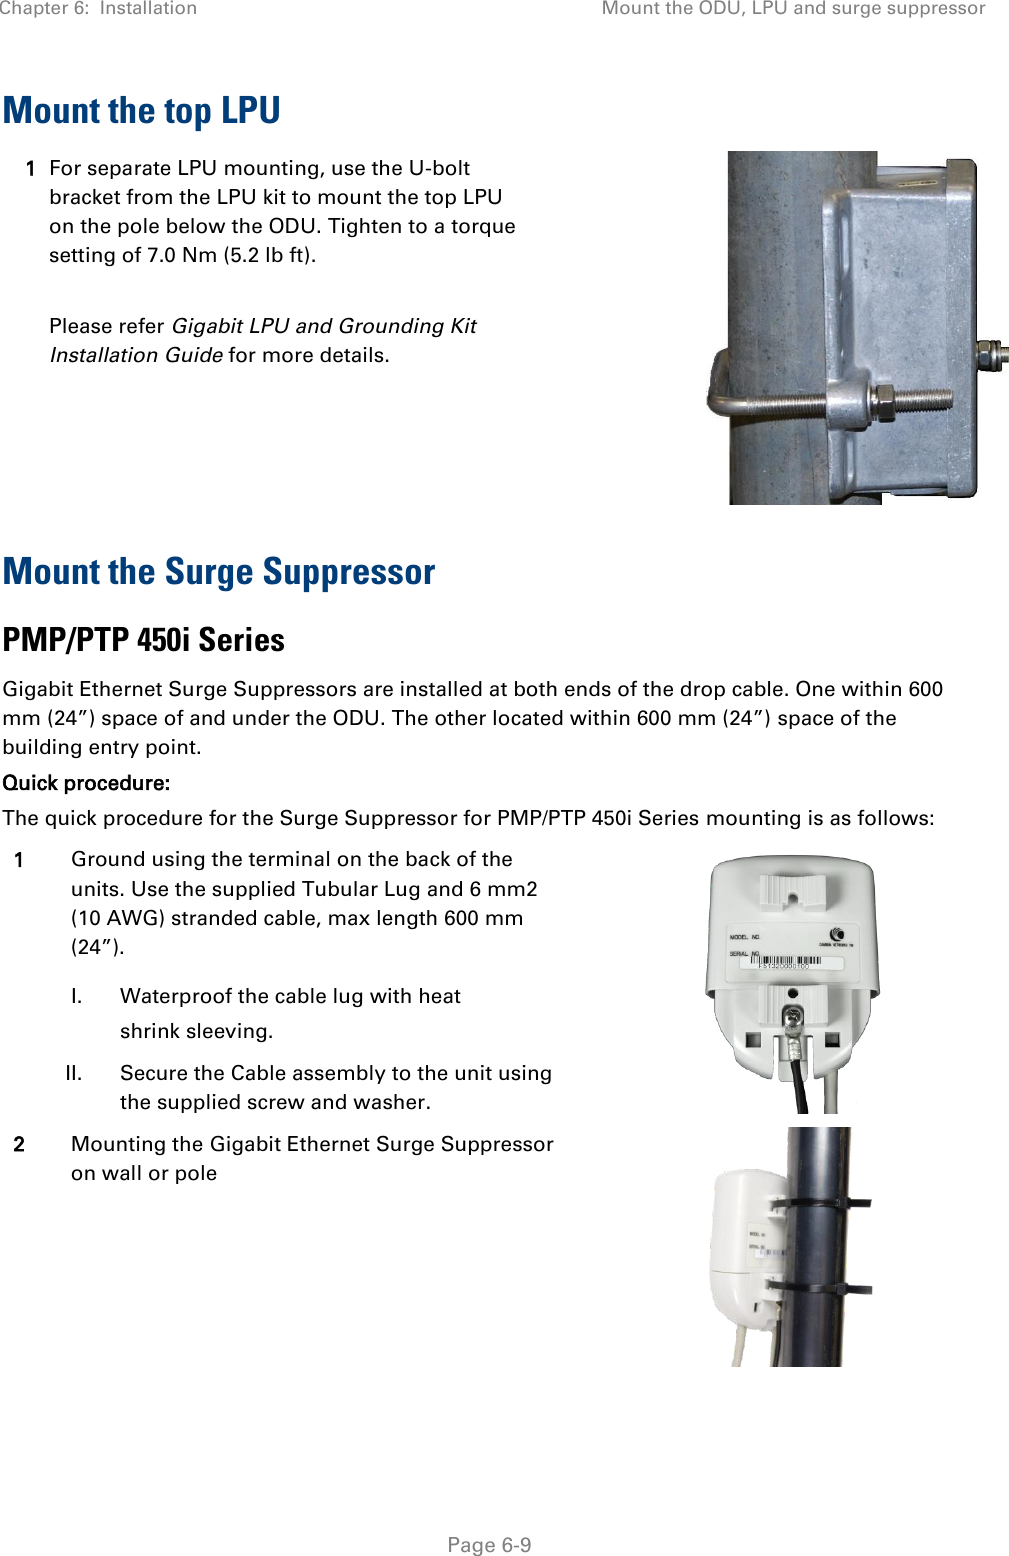 Chapter 6:  Installation Mount the ODU, LPU and surge suppressor   Page 6-9 Mount the top LPU 1 For separate LPU mounting, use the U-bolt bracket from the LPU kit to mount the top LPU on the pole below the ODU. Tighten to a torque setting of 7.0 Nm (5.2 lb ft).  Please refer Gigabit LPU and Grounding Kit Installation Guide for more details.  Mount the Surge Suppressor PMP/PTP 450i Series  Gigabit Ethernet Surge Suppressors are installed at both ends of the drop cable. One within 600 mm (24”) space of and under the ODU. The other located within 600 mm (24”) space of the building entry point.  Quick procedure: The quick procedure for the Surge Suppressor for PMP/PTP 450i Series mounting is as follows: 1 Ground using the terminal on the back of the units. Use the supplied Tubular Lug and 6 mm2 (10 AWG) stranded cable, max length 600 mm (24”).   I. Waterproof the cable lug with heat shrink sleeving.  II. Secure the Cable assembly to the unit using the supplied screw and washer. 2 Mounting the Gigabit Ethernet Surge Suppressor on wall or pole  